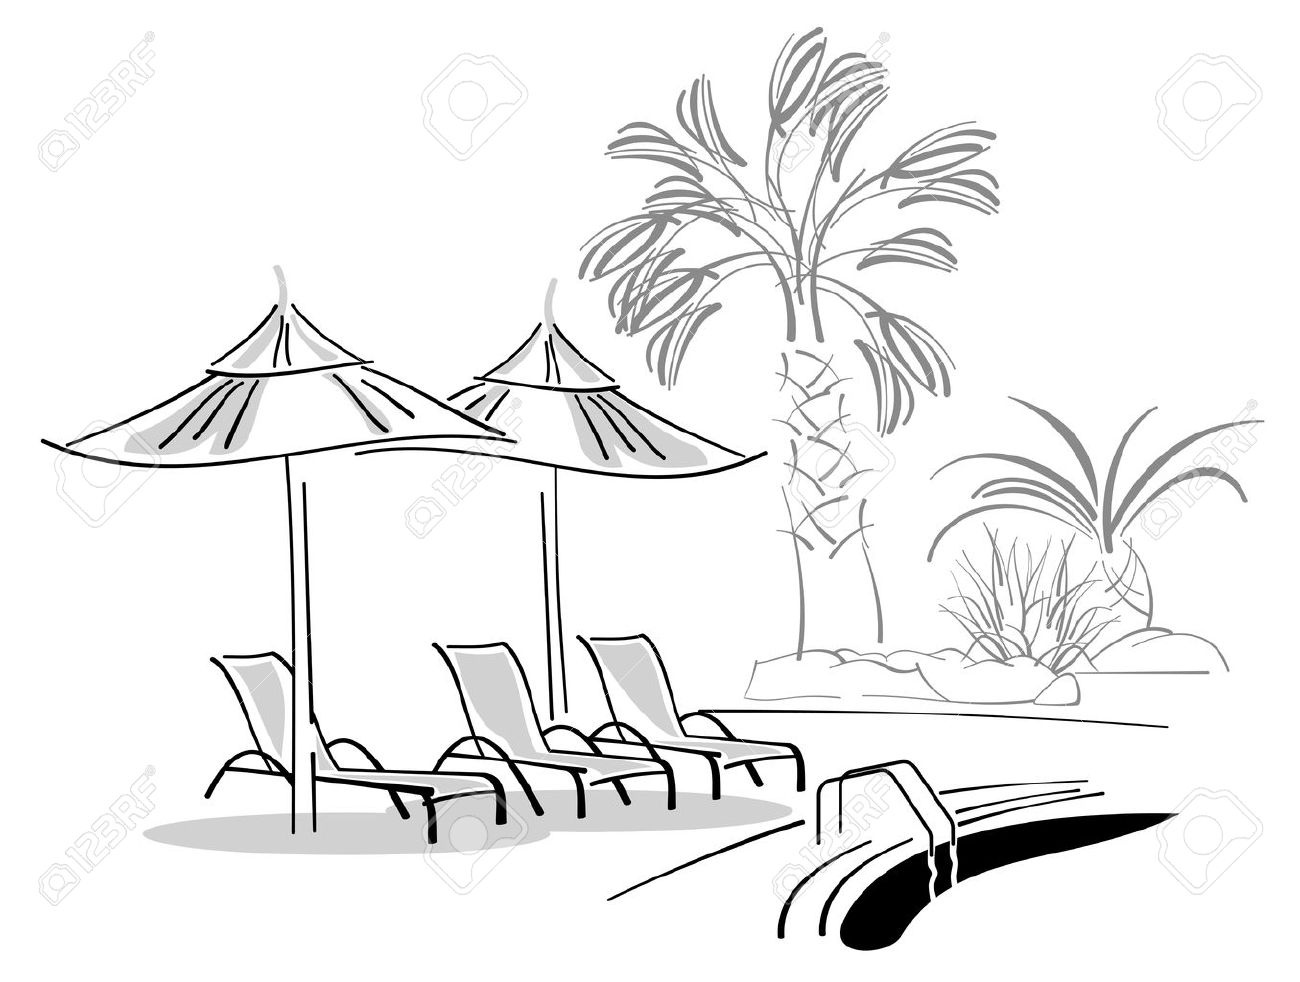 pool chair palm tree black white clipart - Clipground